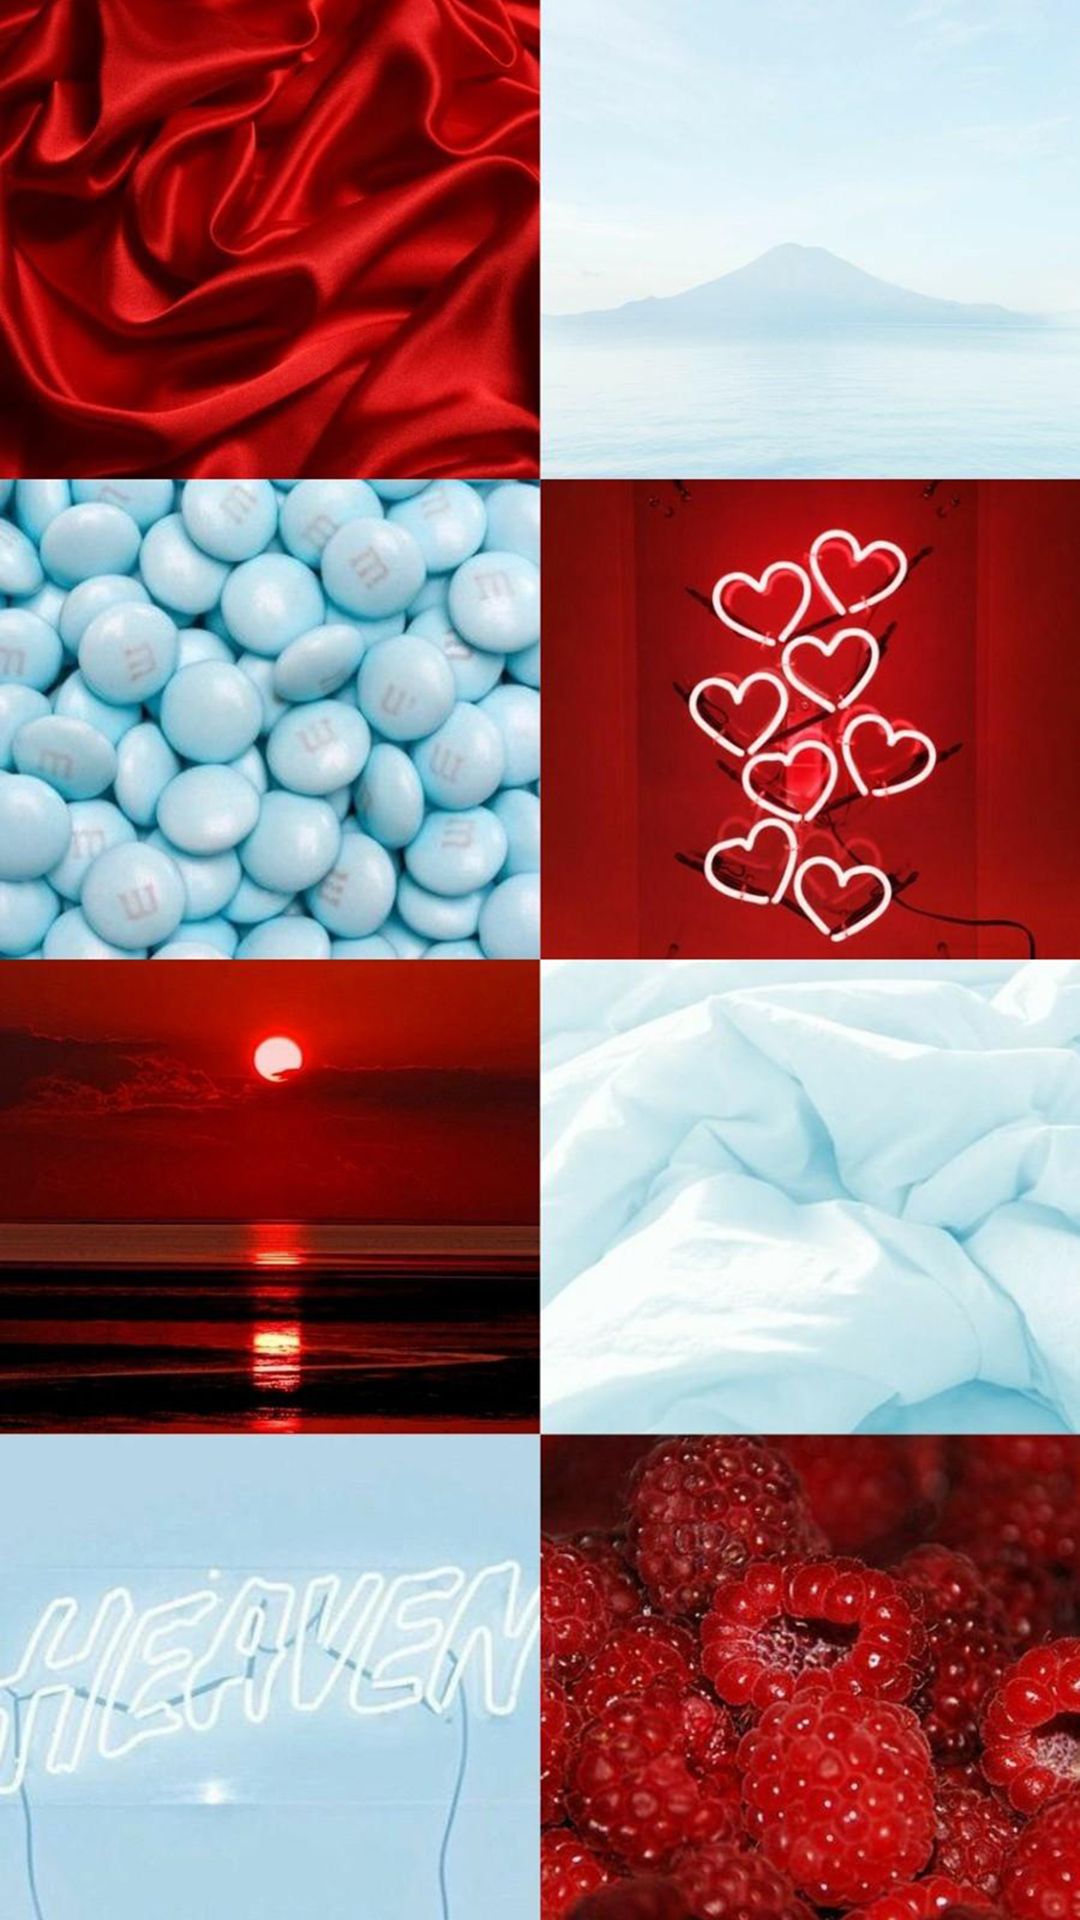 A collage of pictures with different colors - IPhone red, light red, light blue